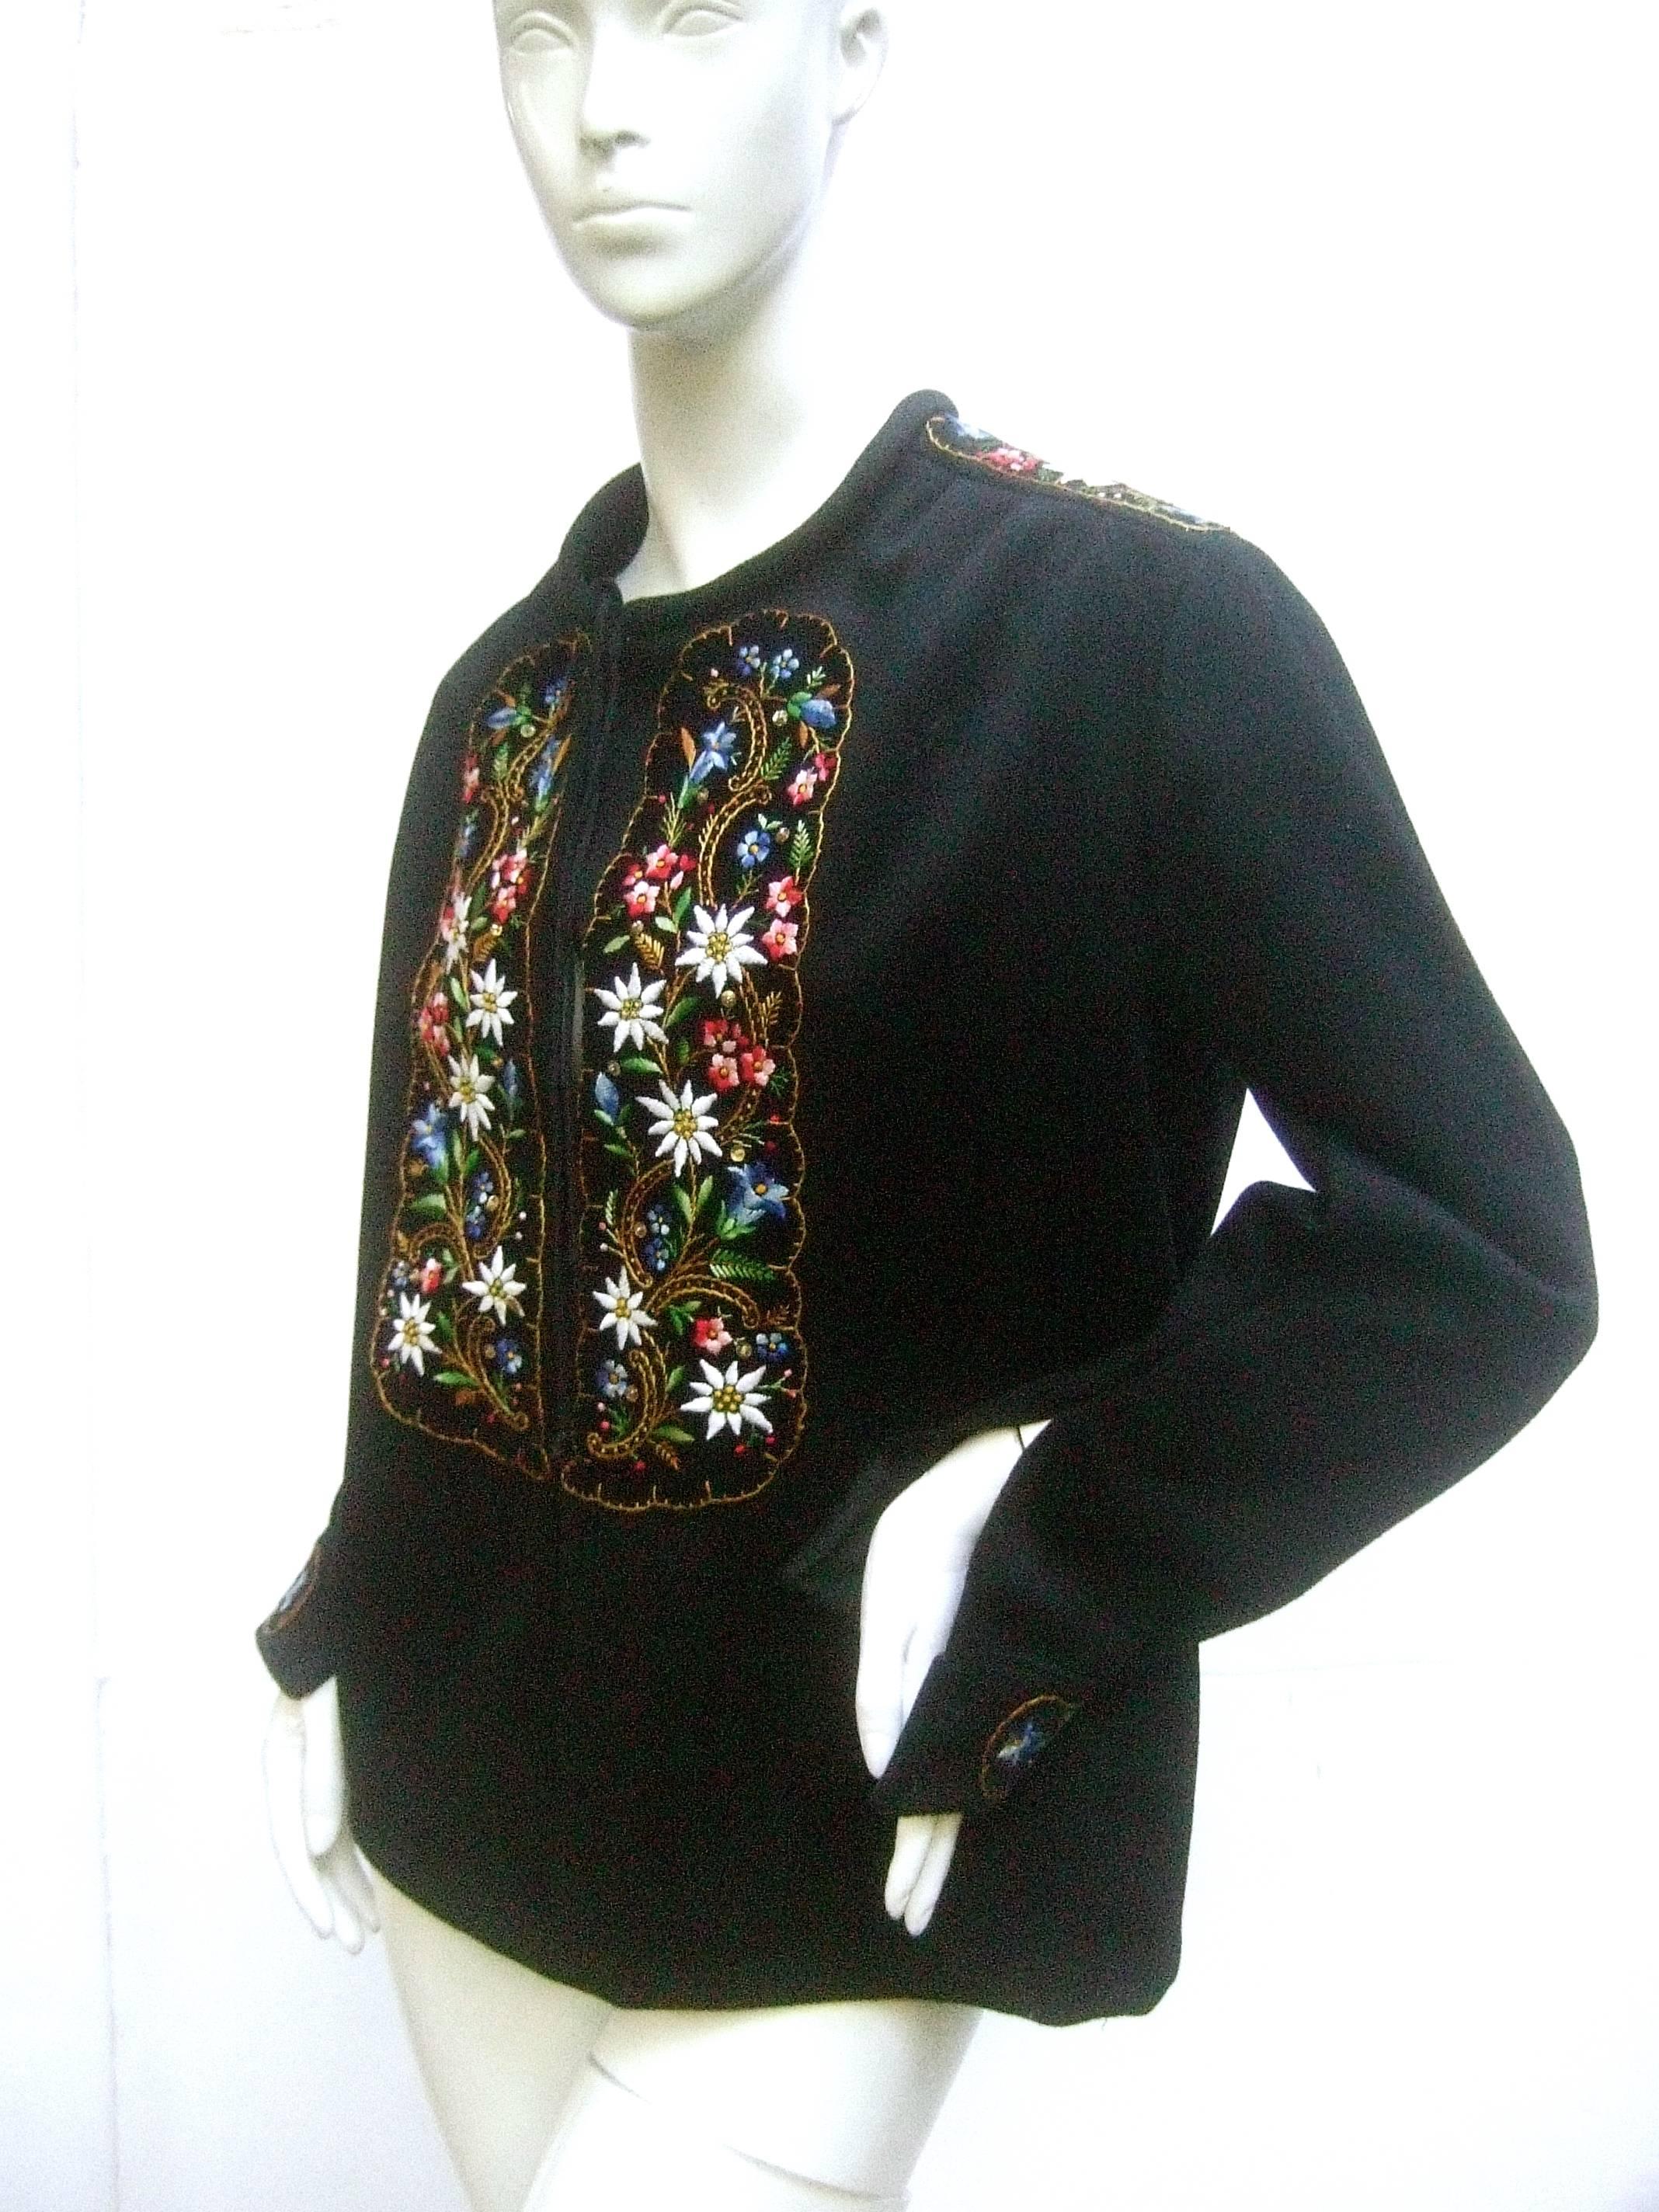 Saks Fifth Avenue embroidered black wool tunic c 1970s 
The unique wool tunic is embellished with intricate floral 
embroidery that runs down the center, across the shoulders 
and extends to the cuffs

The floral embroidery is illuminated against a